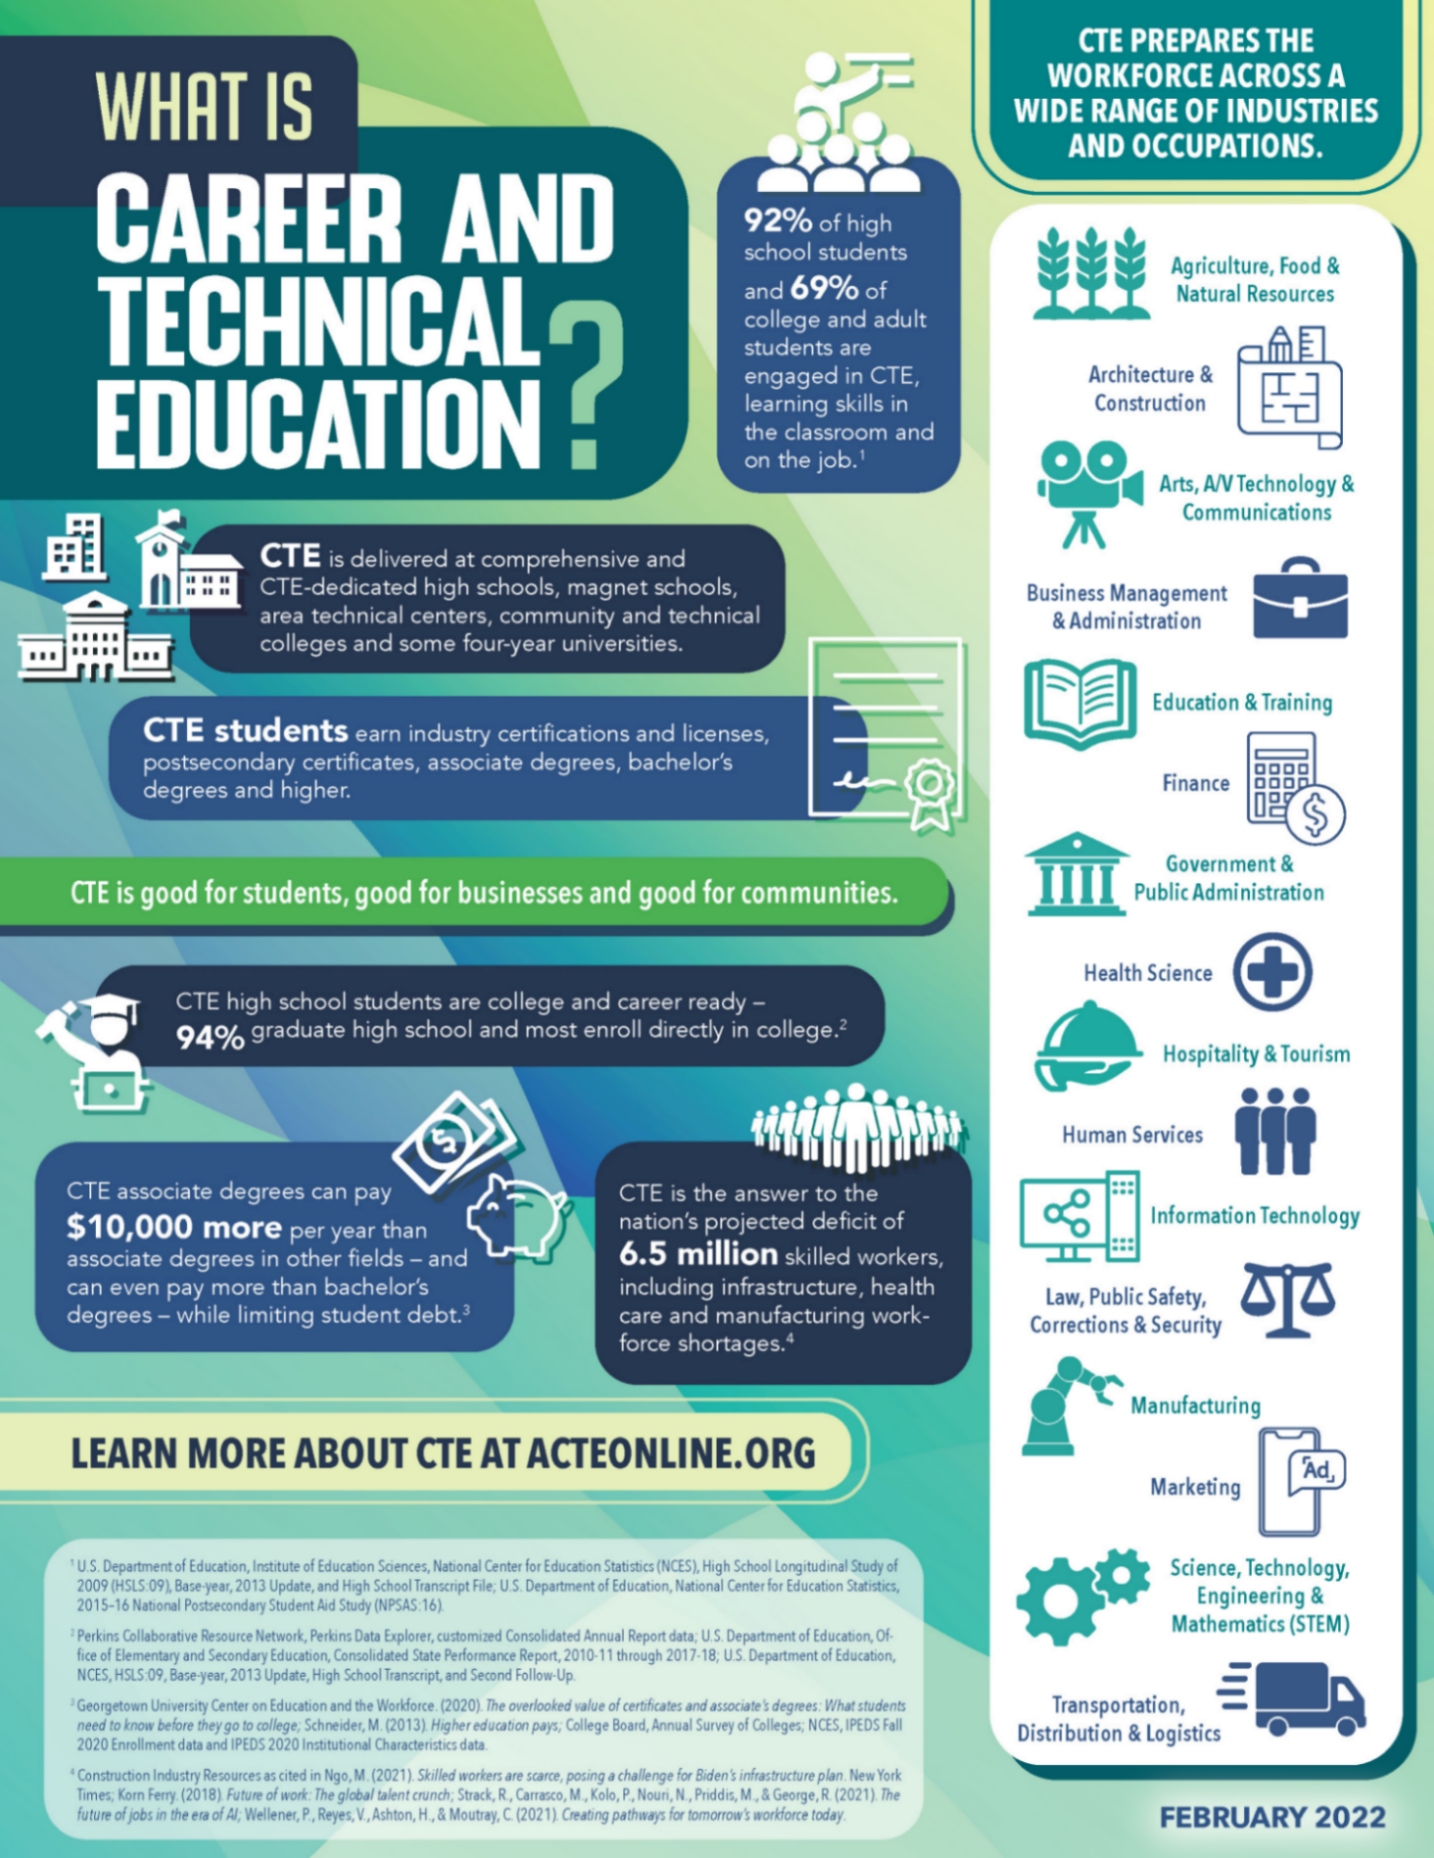 ACTE_What_is_CTE_Infographic_February2022-2 (1)